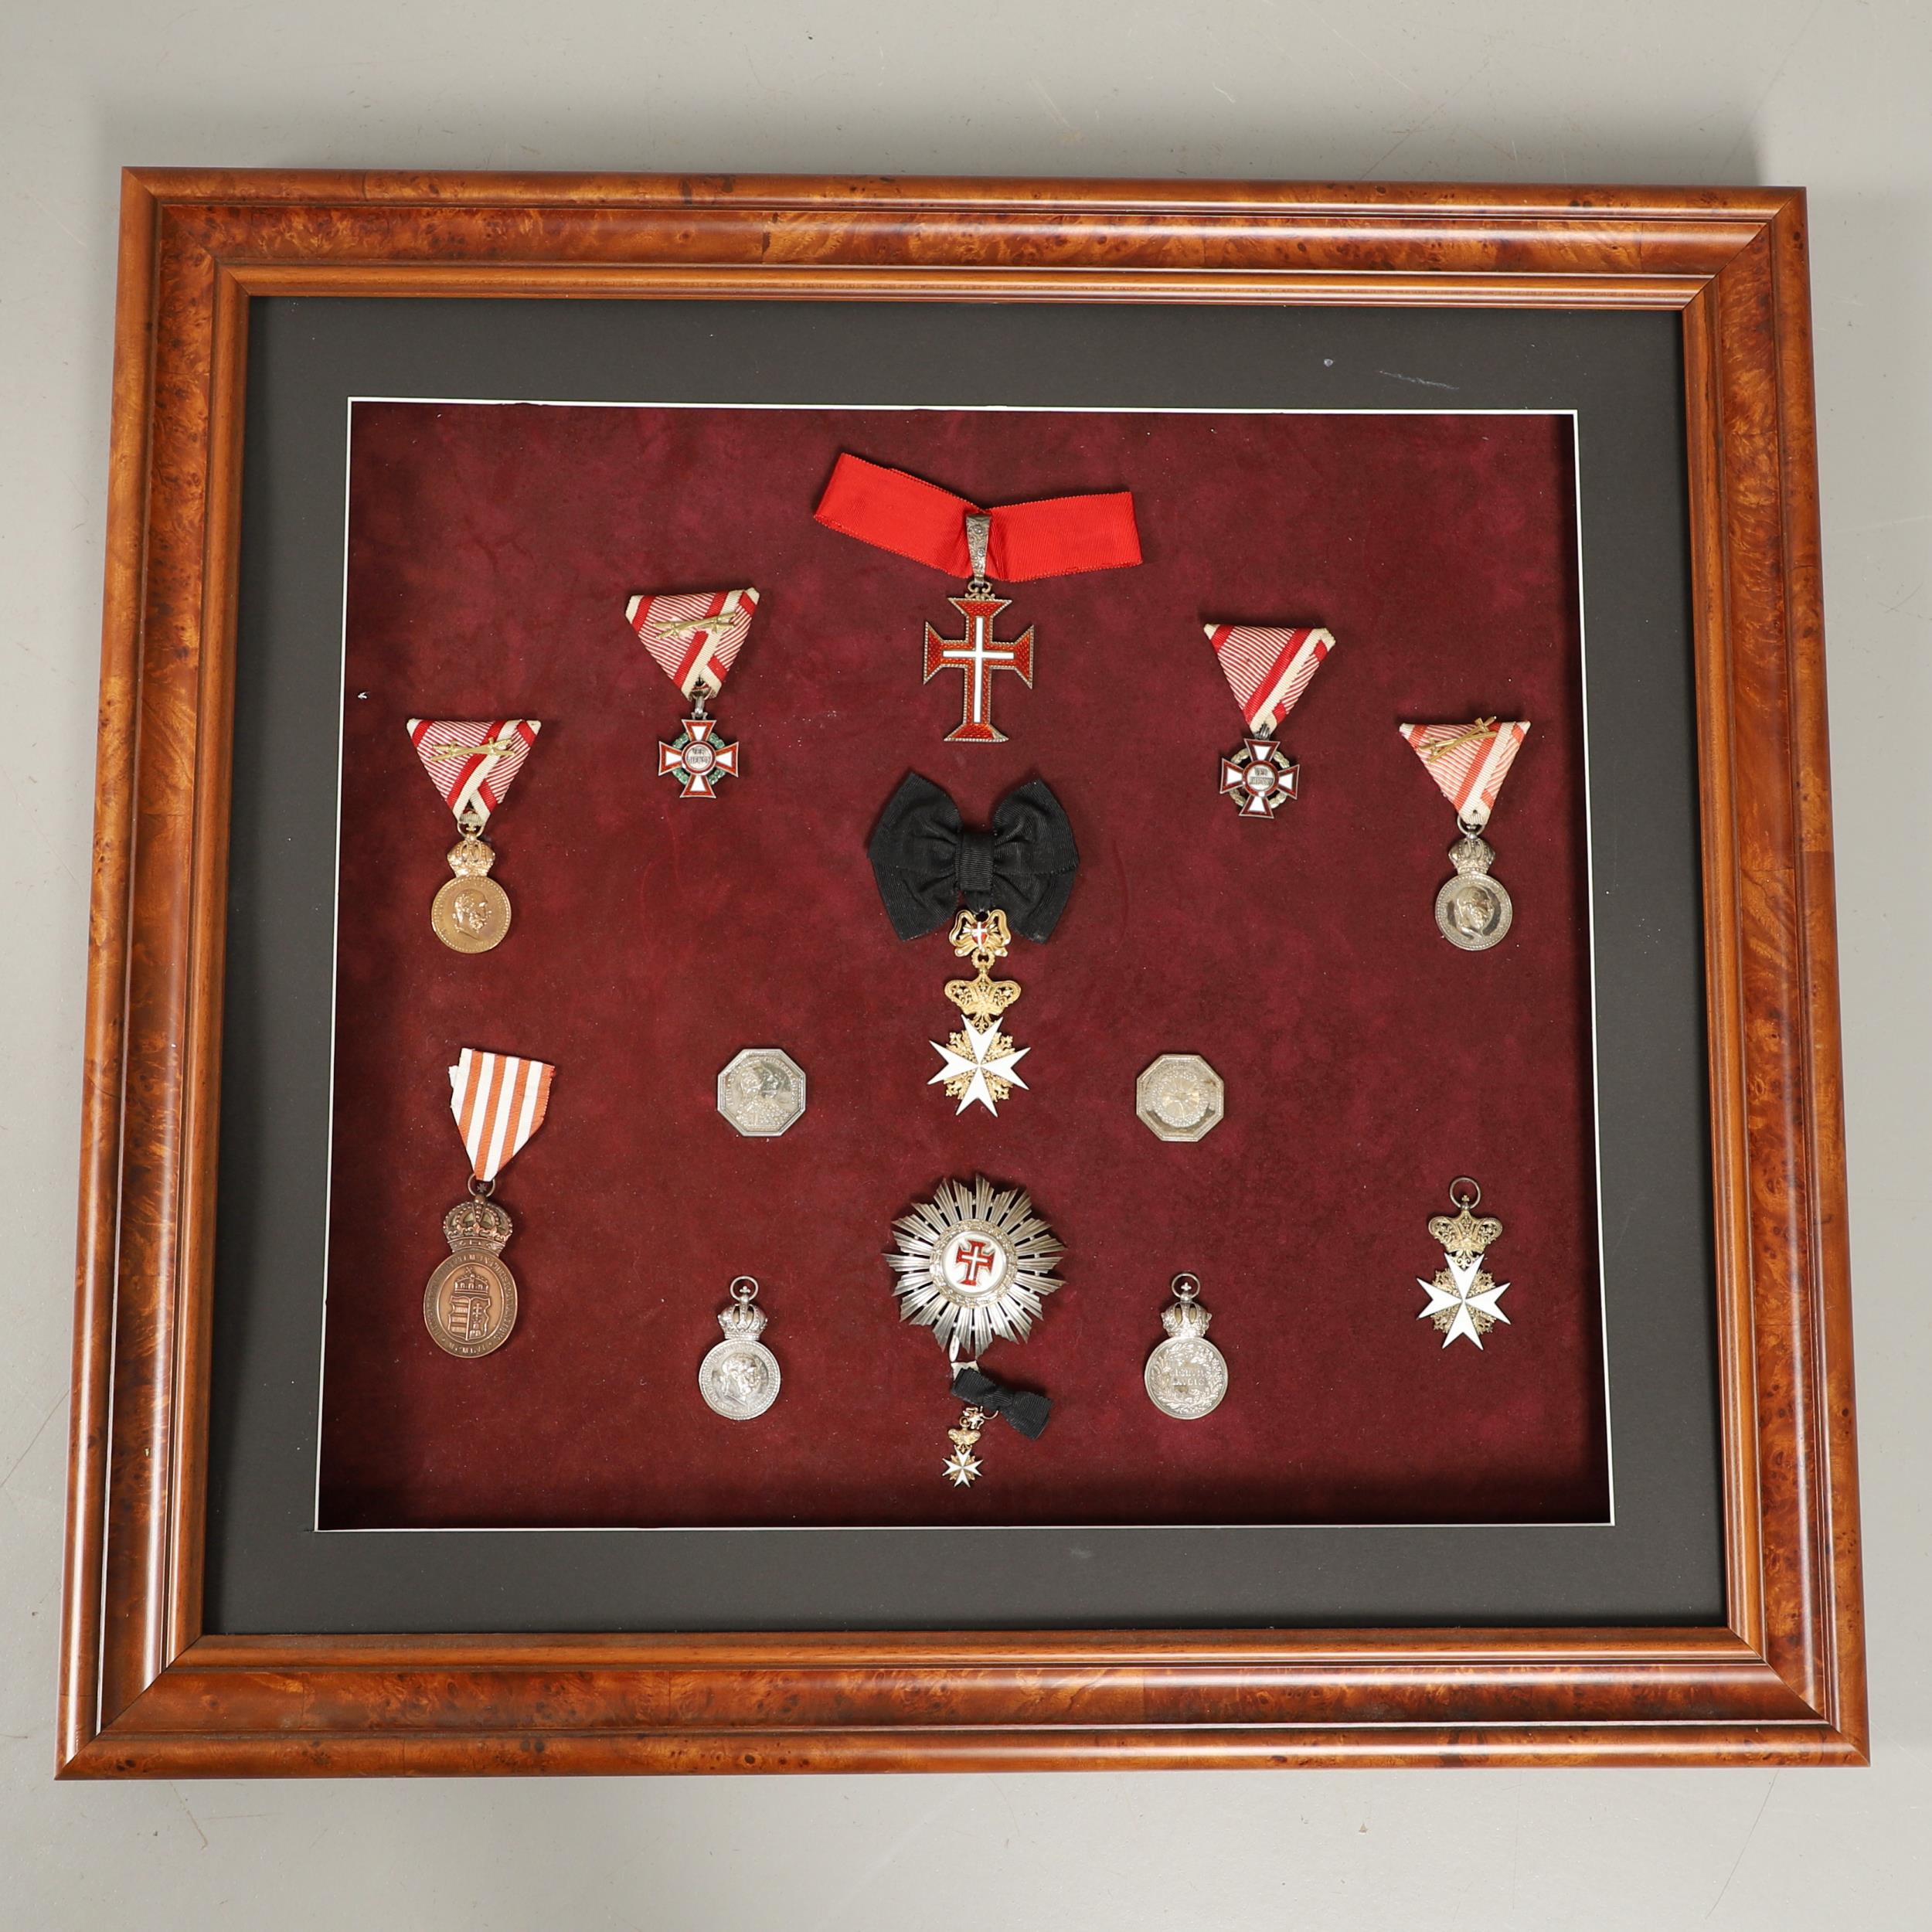 A COLLECTION OF EUROPEAN DECORATIONS ATTRIBUTED TO KURT GRAF STRACHWITZ 1890 - 1961.